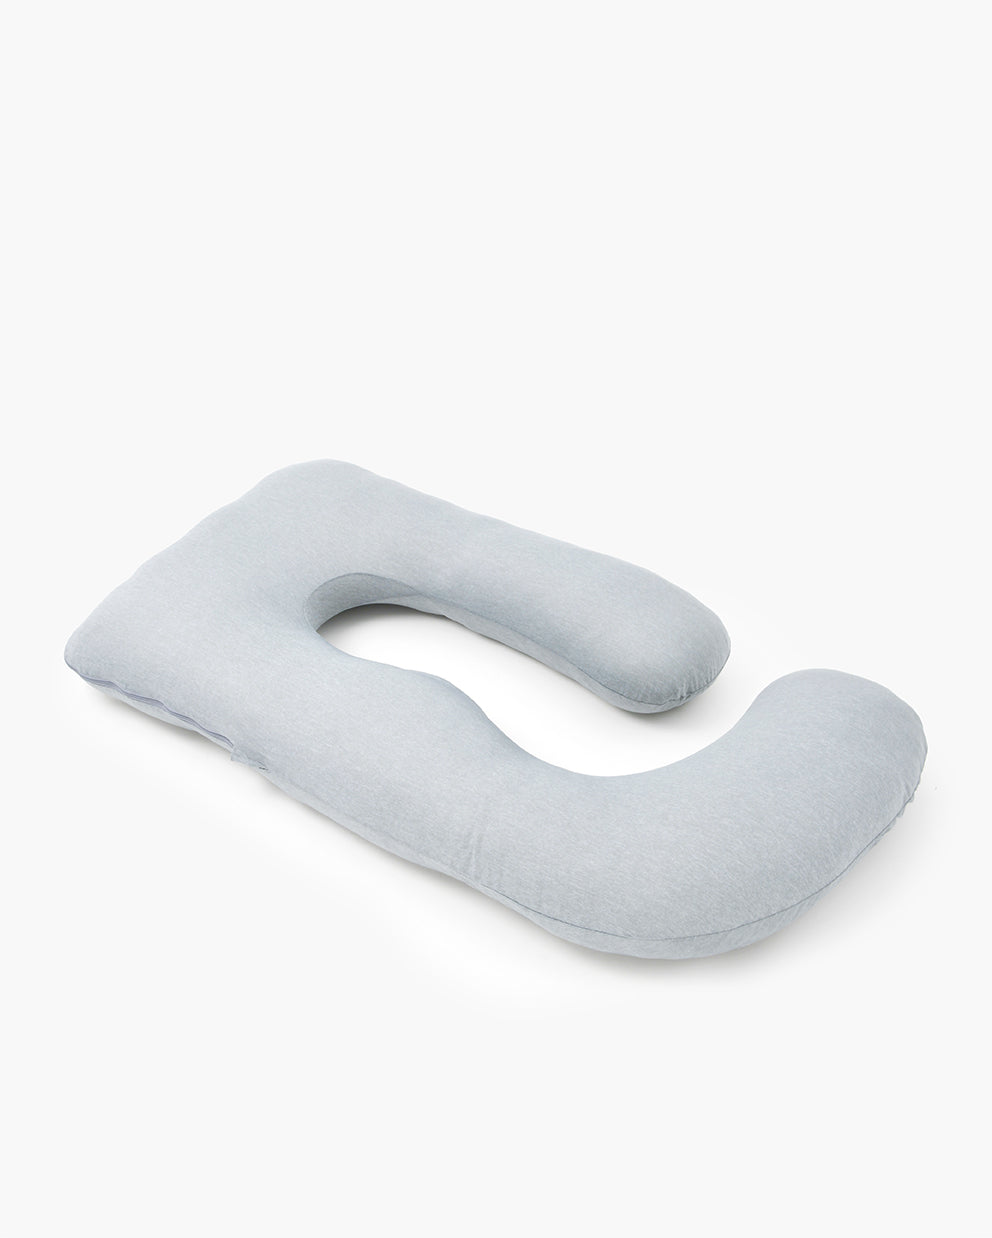 U Shaped Cooling Fabric Pregnancy Pillow Cool Comfy Pillow